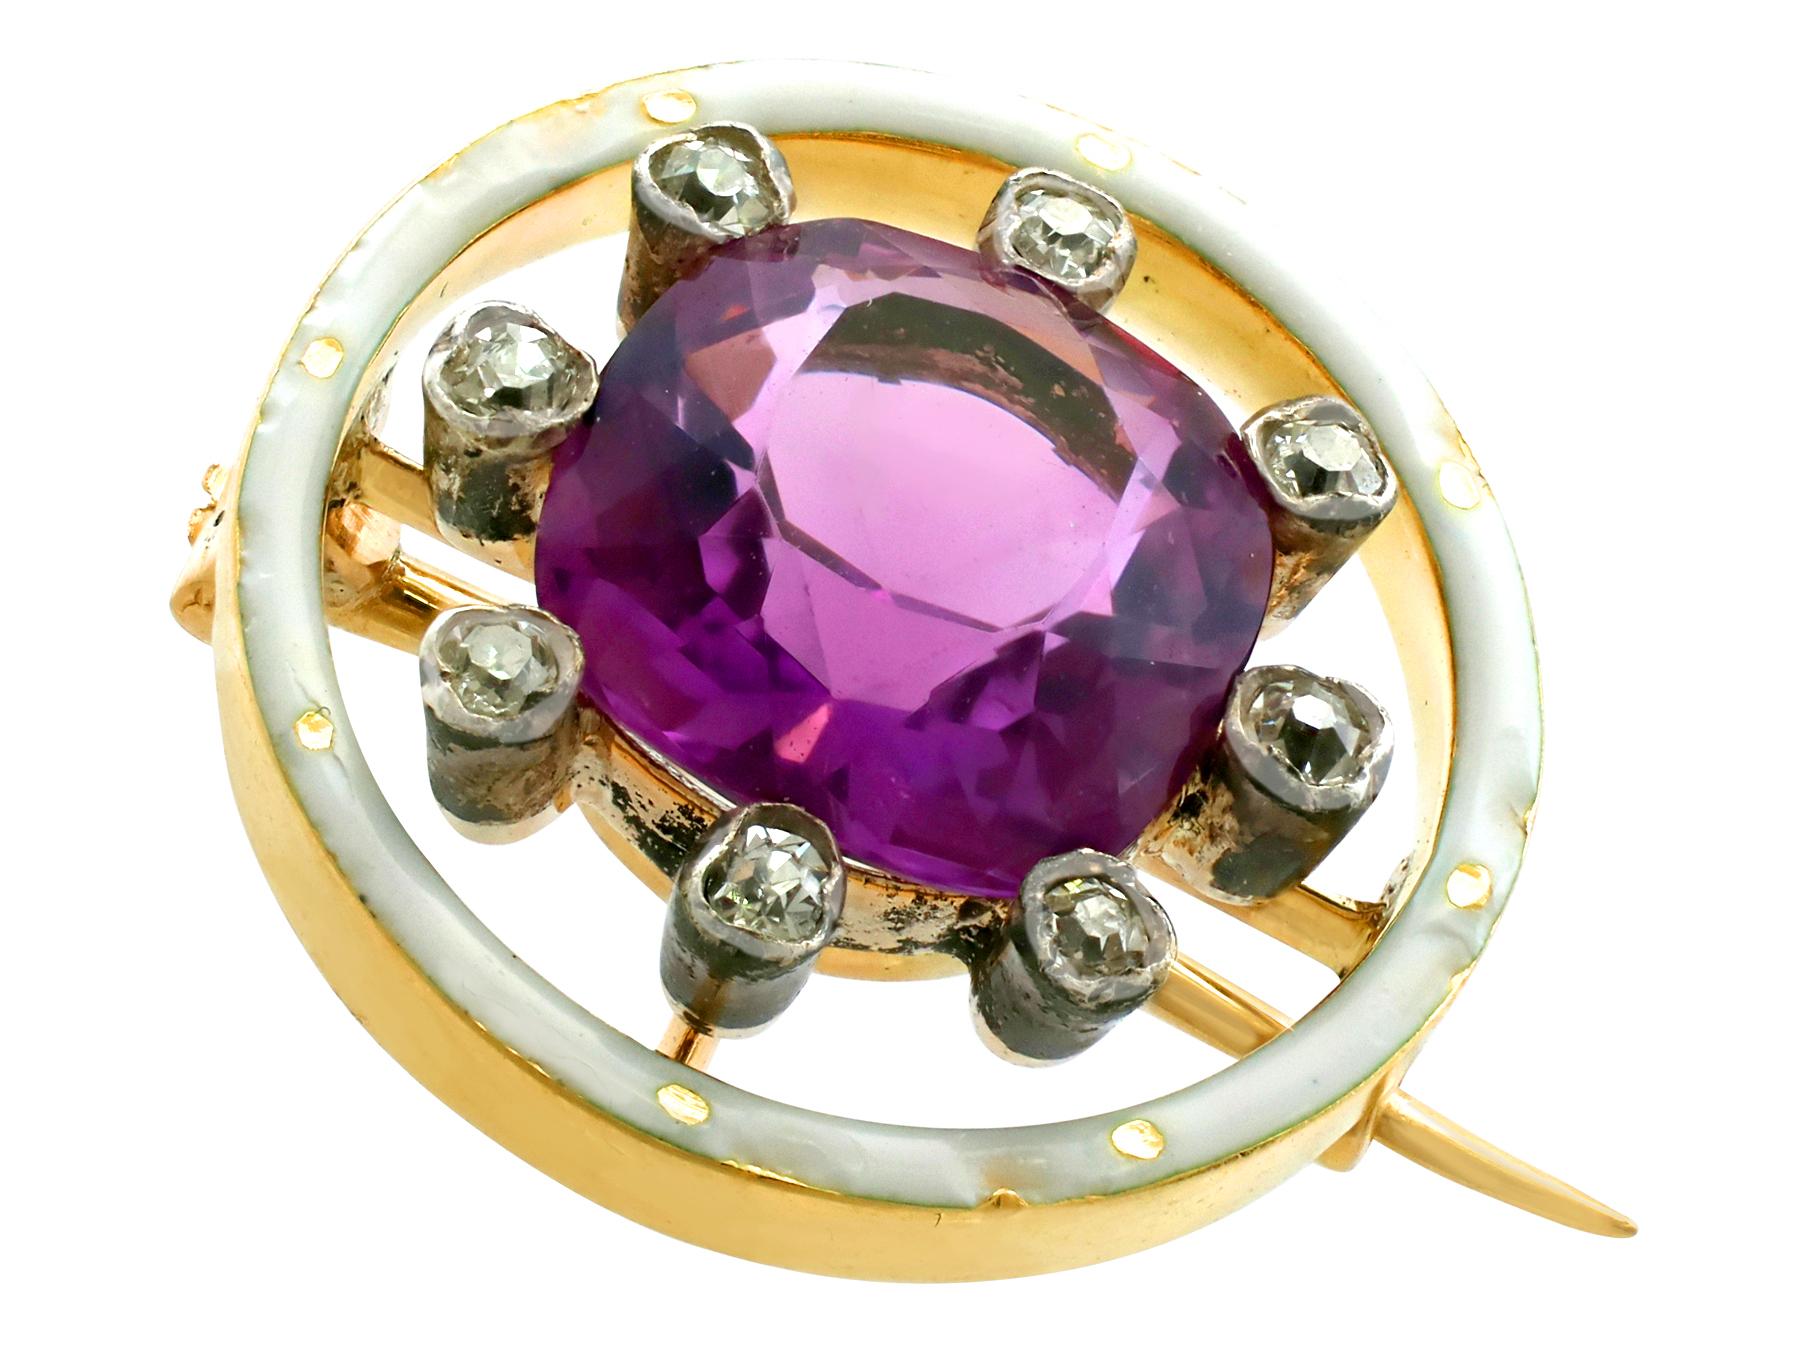 An impressive antique 1920's 2.26 carat amethyst and 0.16 carat diamond, 18 karat yellow gold and silver set brooch; part of our diverse antique estate jewelry collections.

This fine and impressive antique amethyst brooch has been crafted in 18k